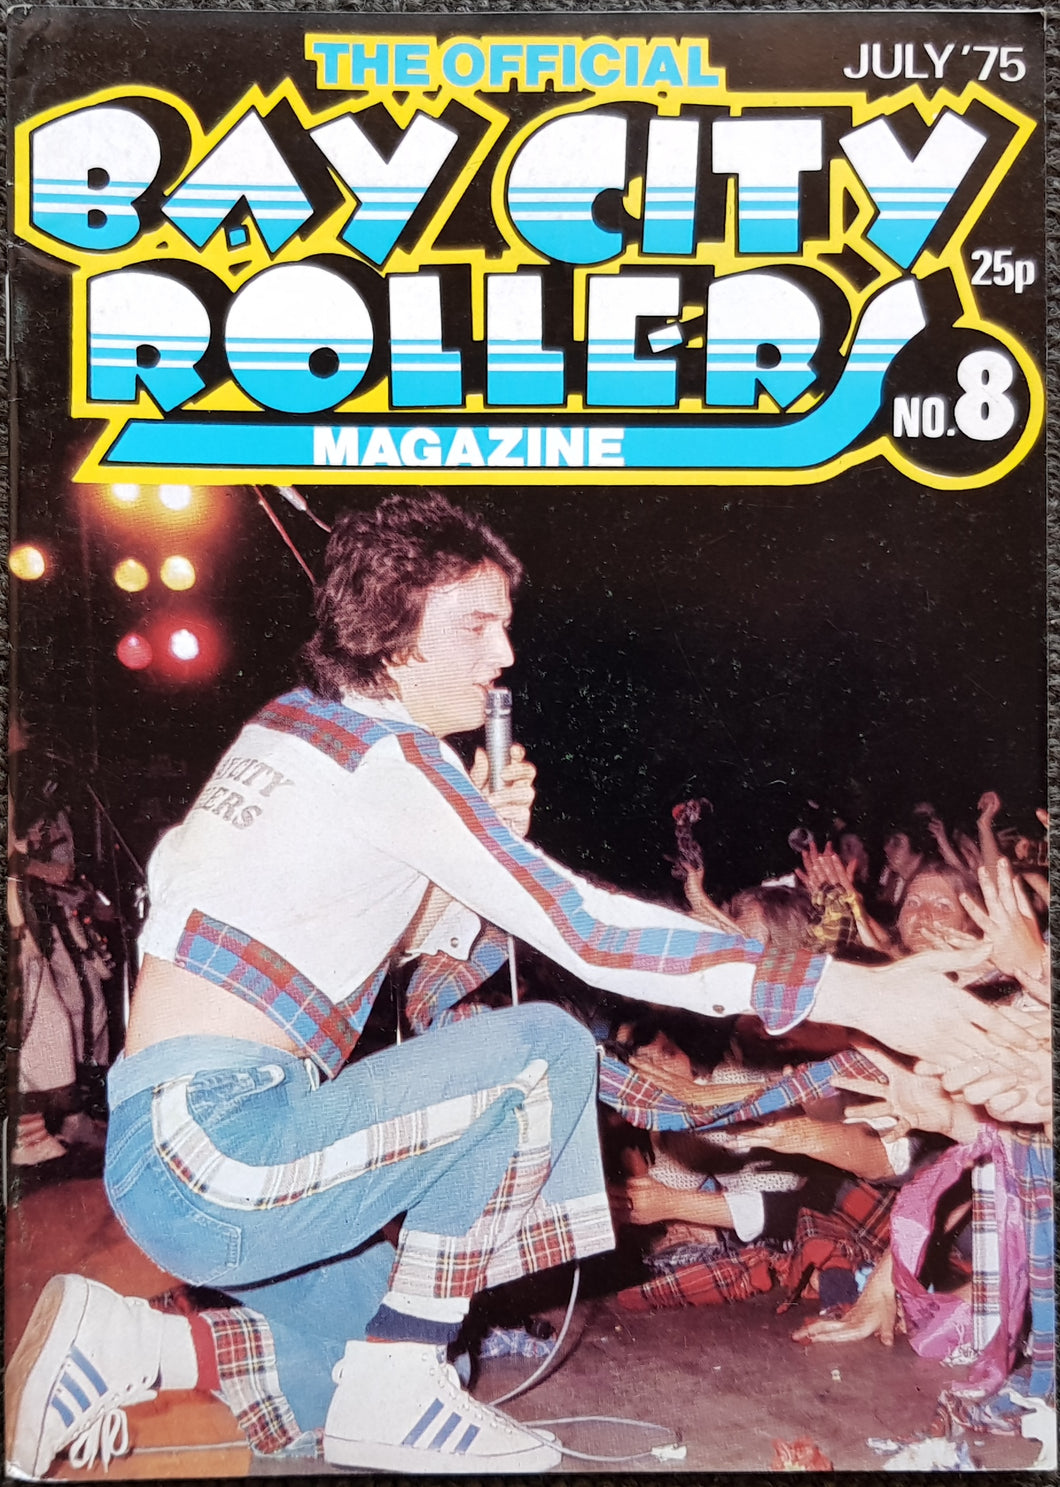 Bay City Rollers - The Official Bay City Rollers Magazine No.8